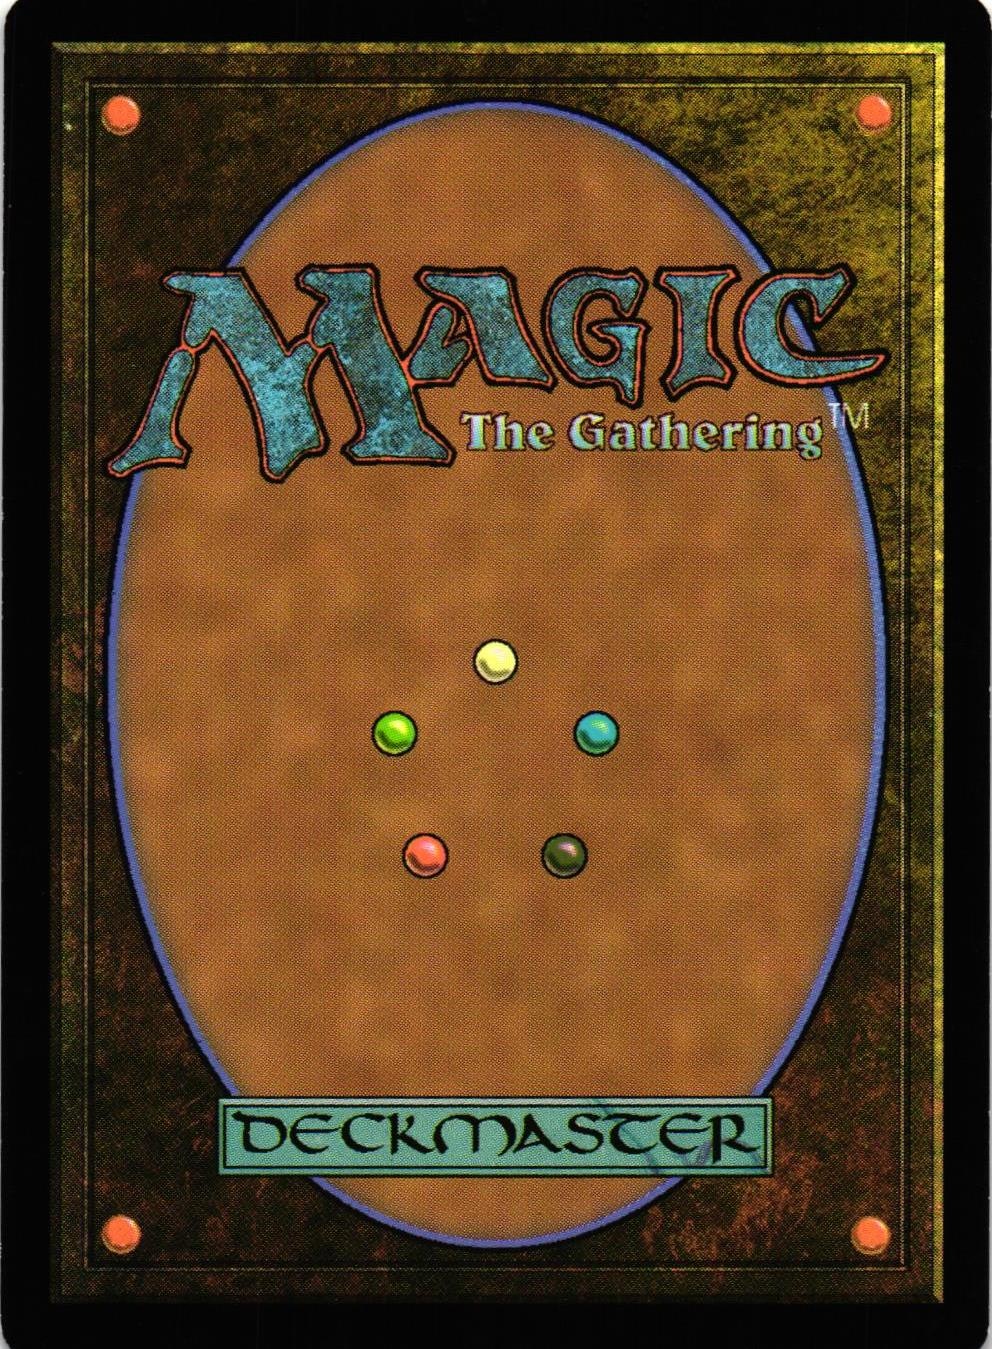 Break Through the Line Uncommon 094/185 Fate Reforged (FRF) Magic the Gathering